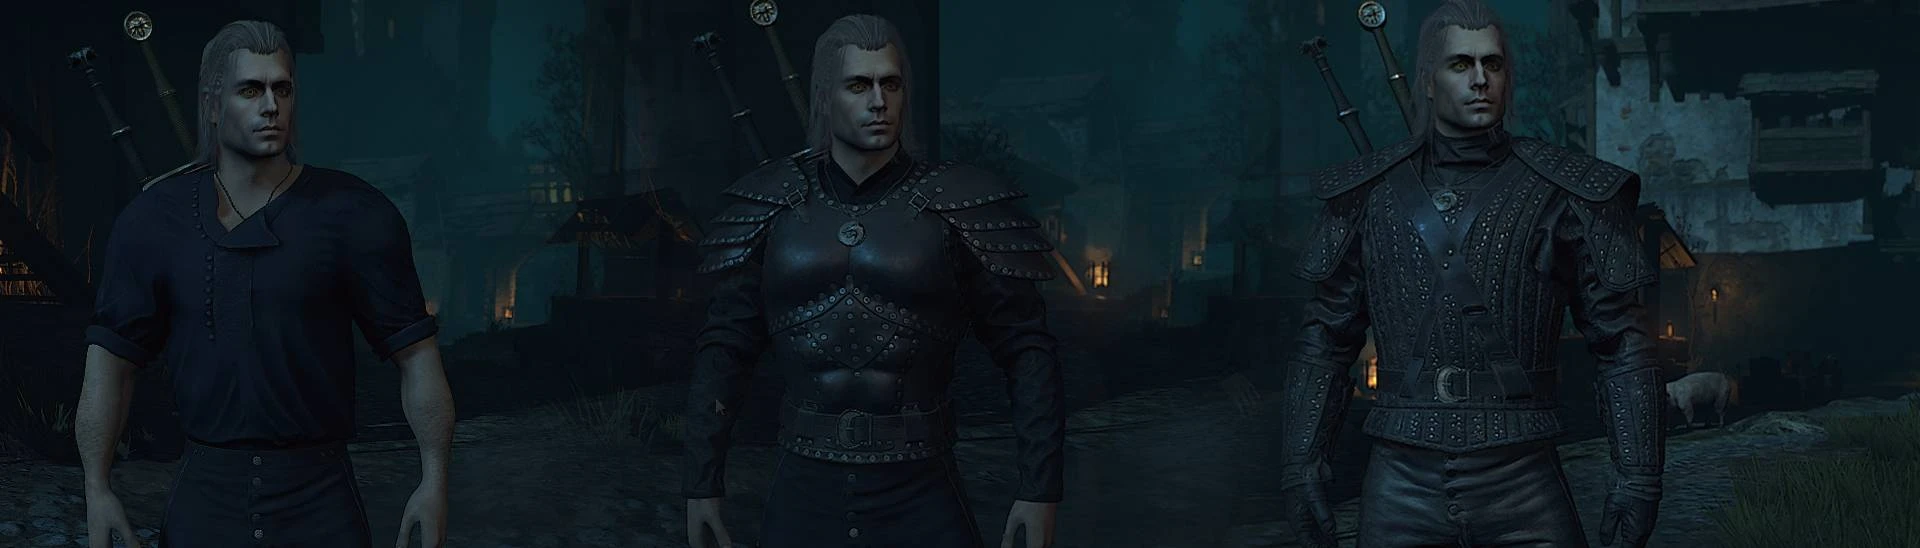 Discover some cool game-changing mods for The Witcher 3: Wild Hunt 